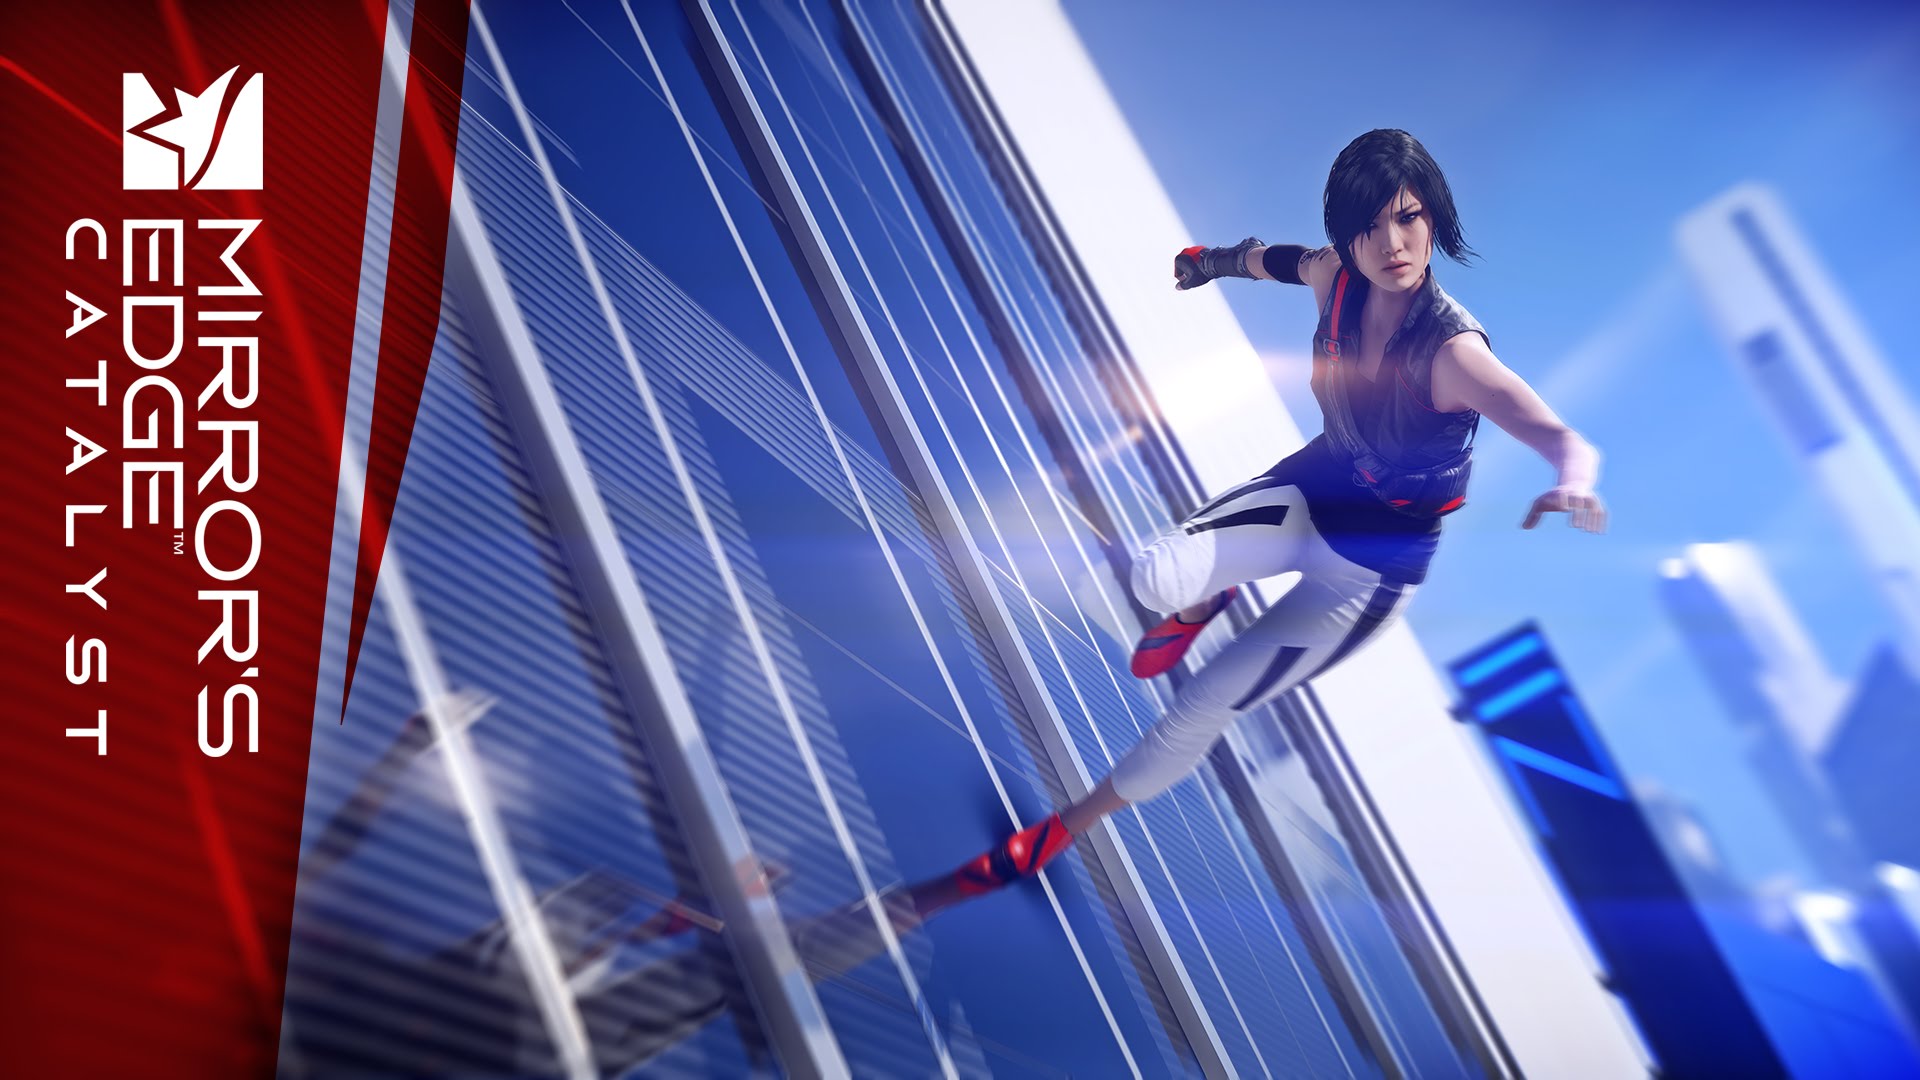 Mirror's Edge Catalyst: The kind of sequel that makes you go 'meh' -  Sudbury News